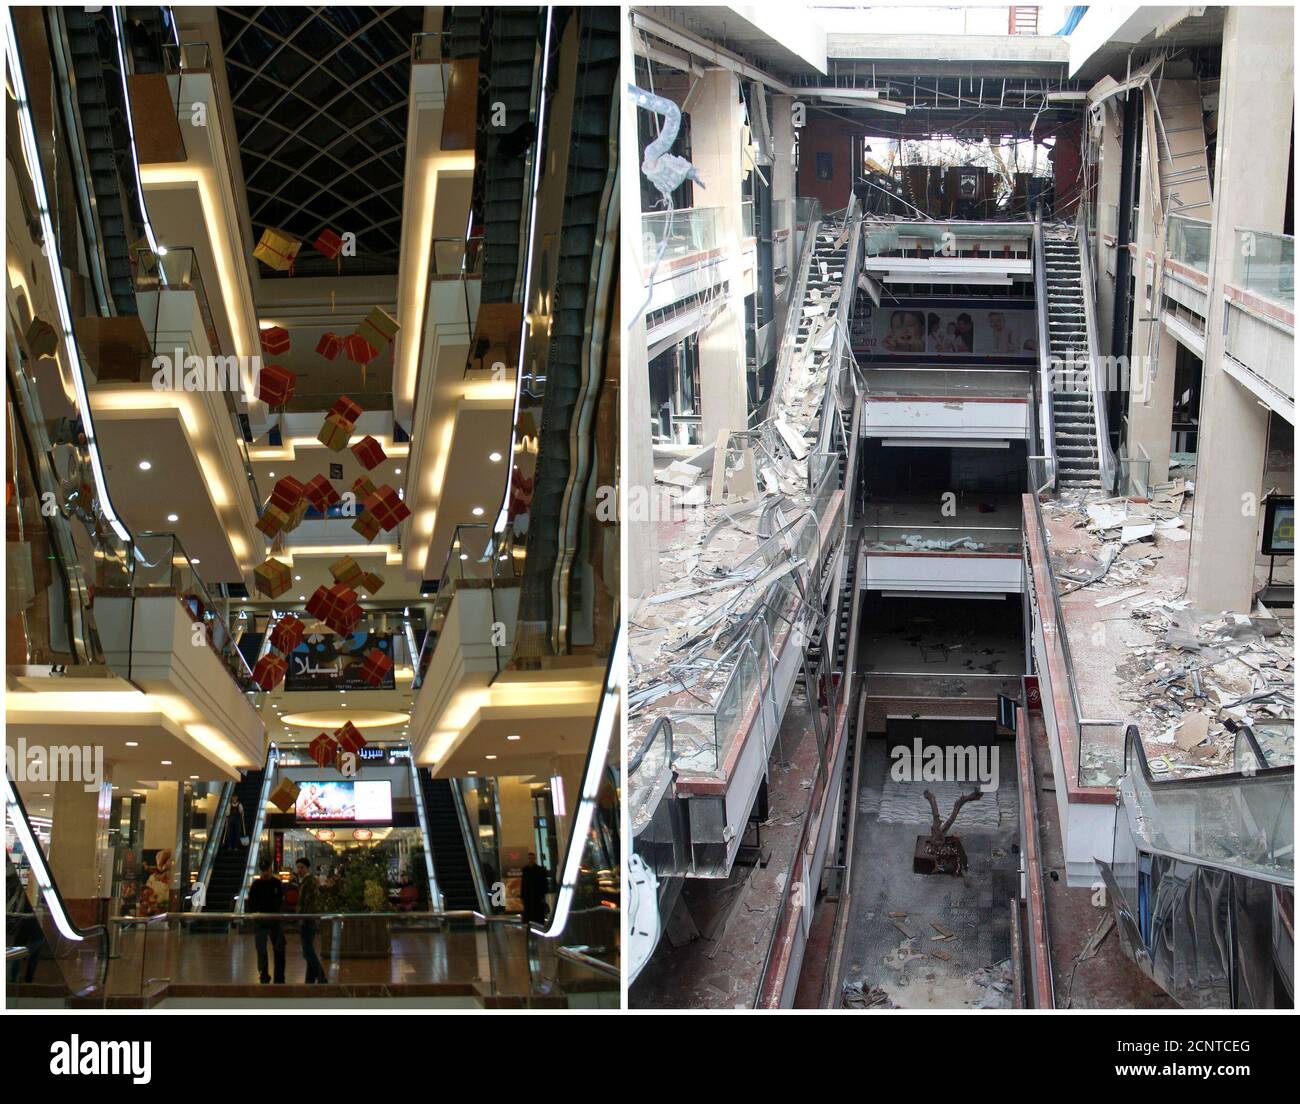 A combination picture shows Shahba Mall, one of the largest commercial  shopping centres in Syria, before it was damaged on December 12, 2009 (L)  and after it was damaged (R) on October